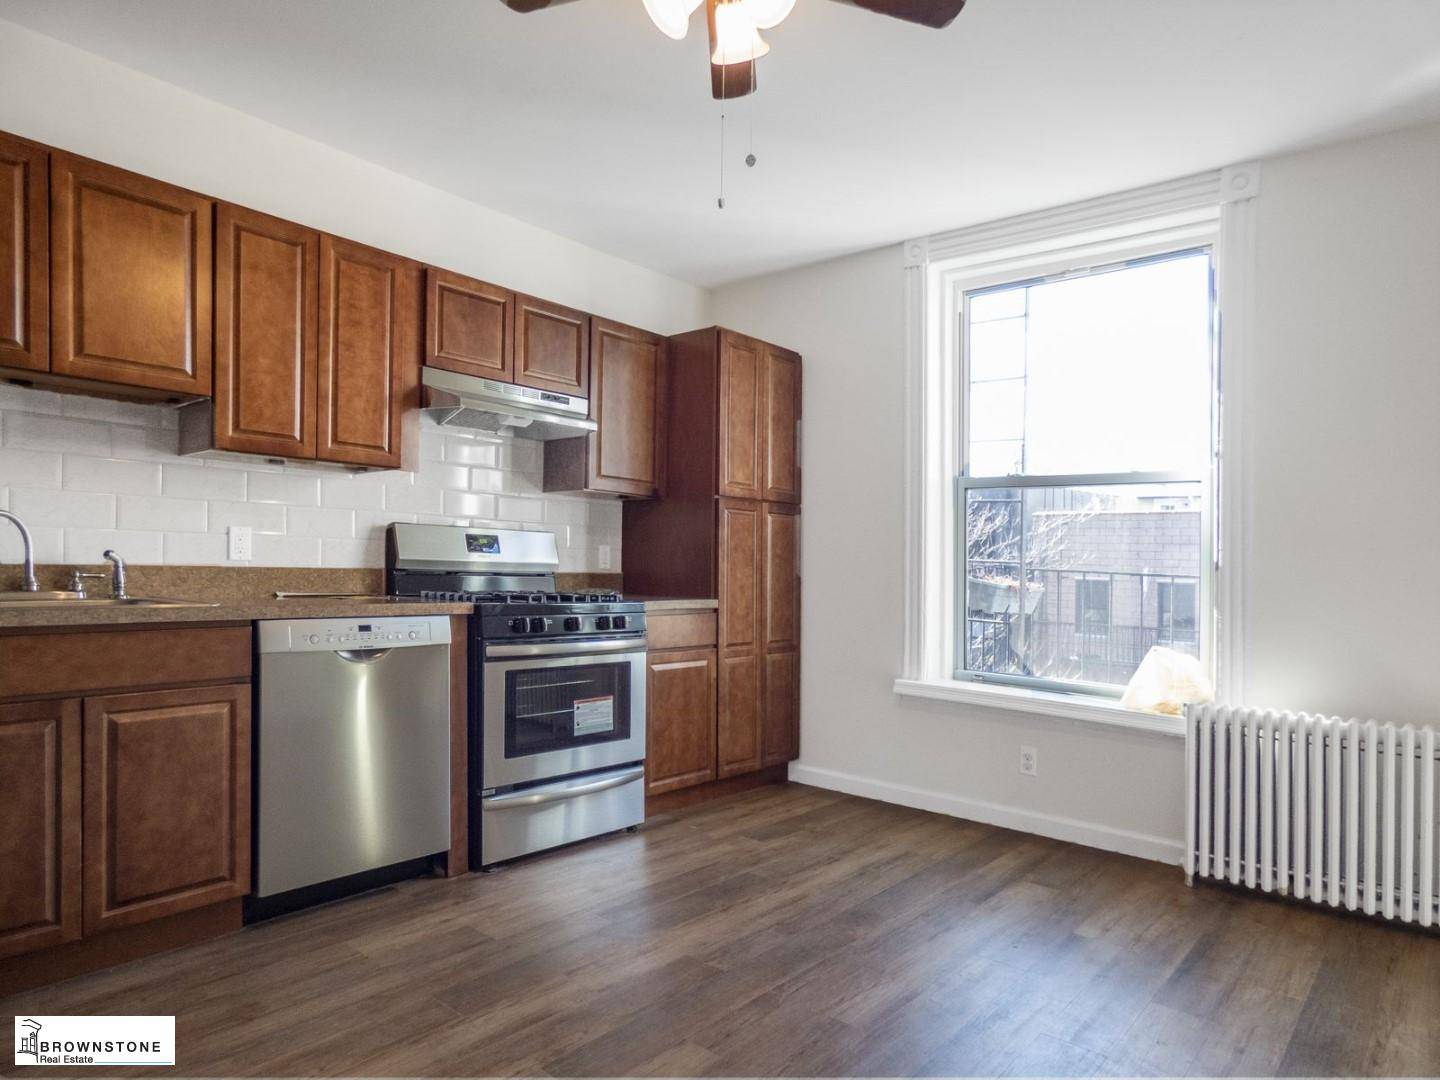 Carroll Gardens newly renovated traditional floor through apartment in the heart of the community.